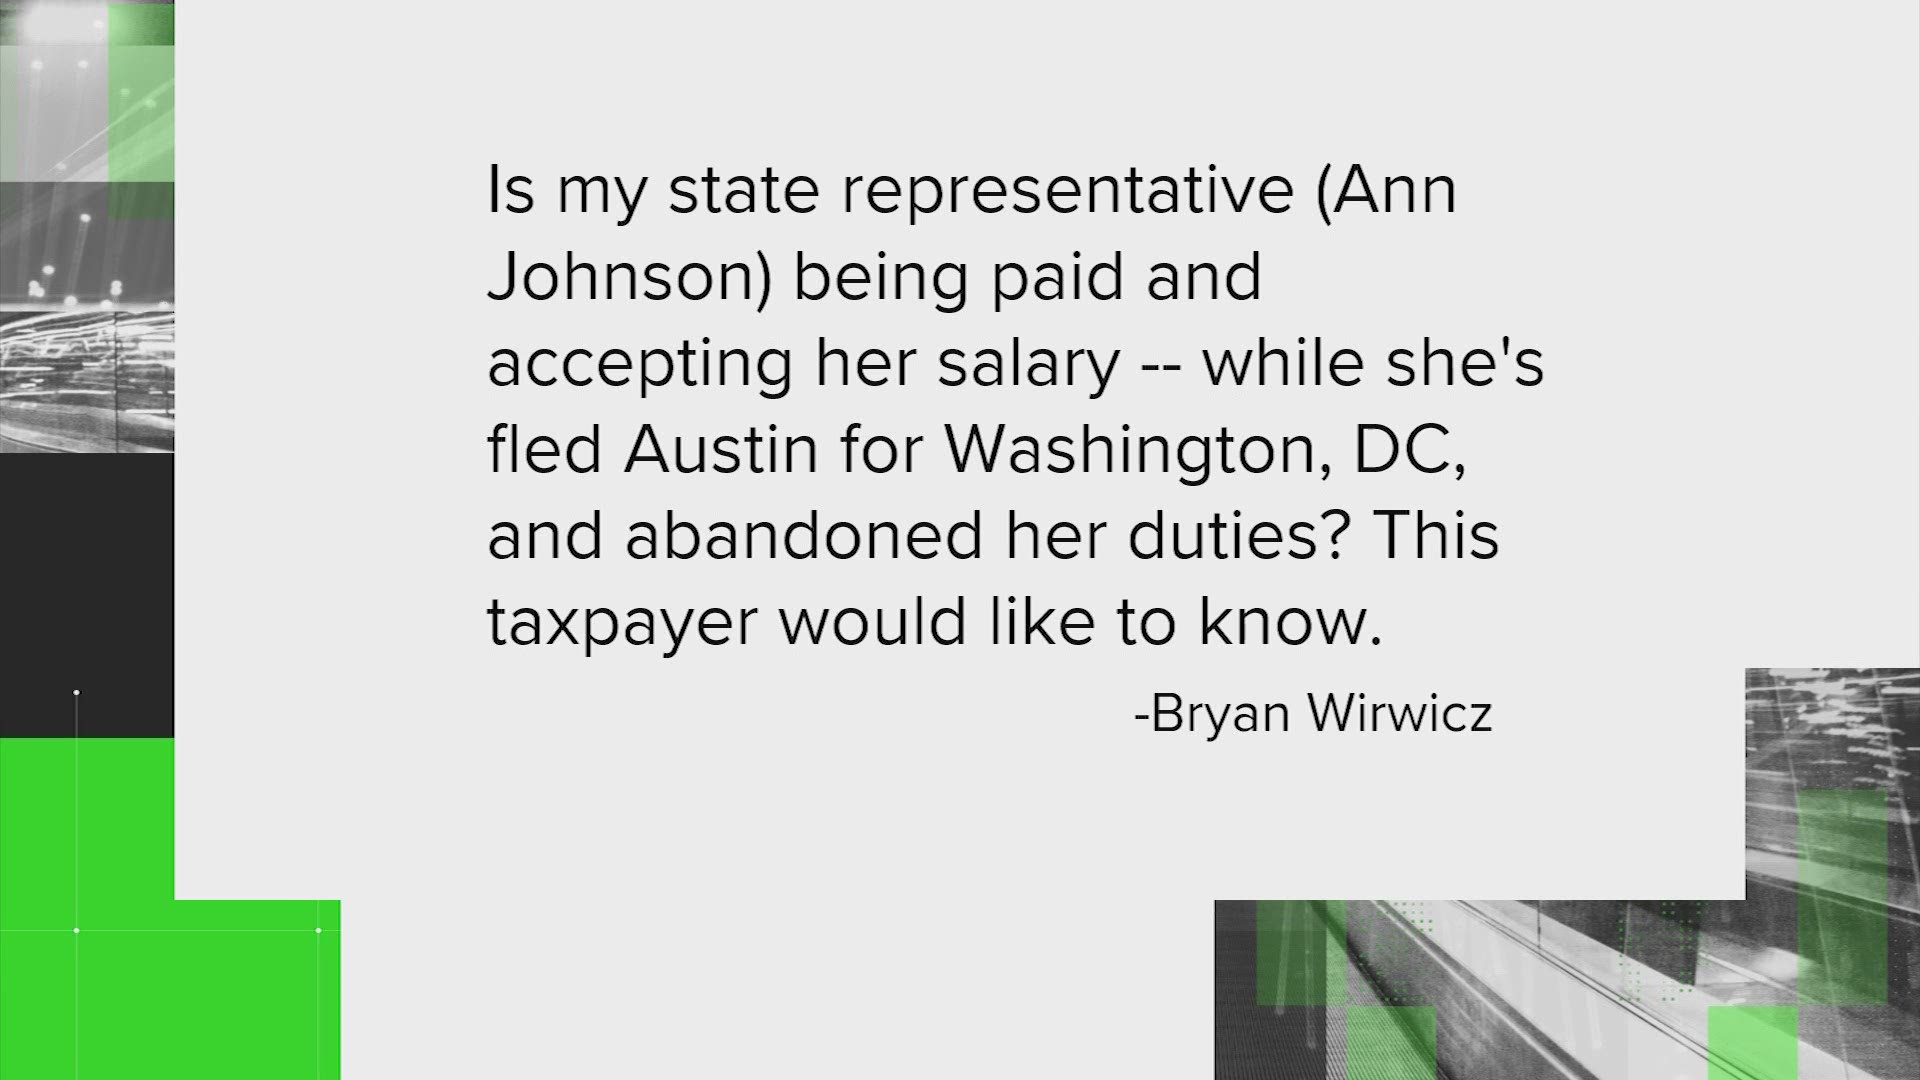 A viewer sent this question to our VERIFY team: Is my state representative being paid while she's fled Austin for Washington, DC? Here's what our VERIFY team found.